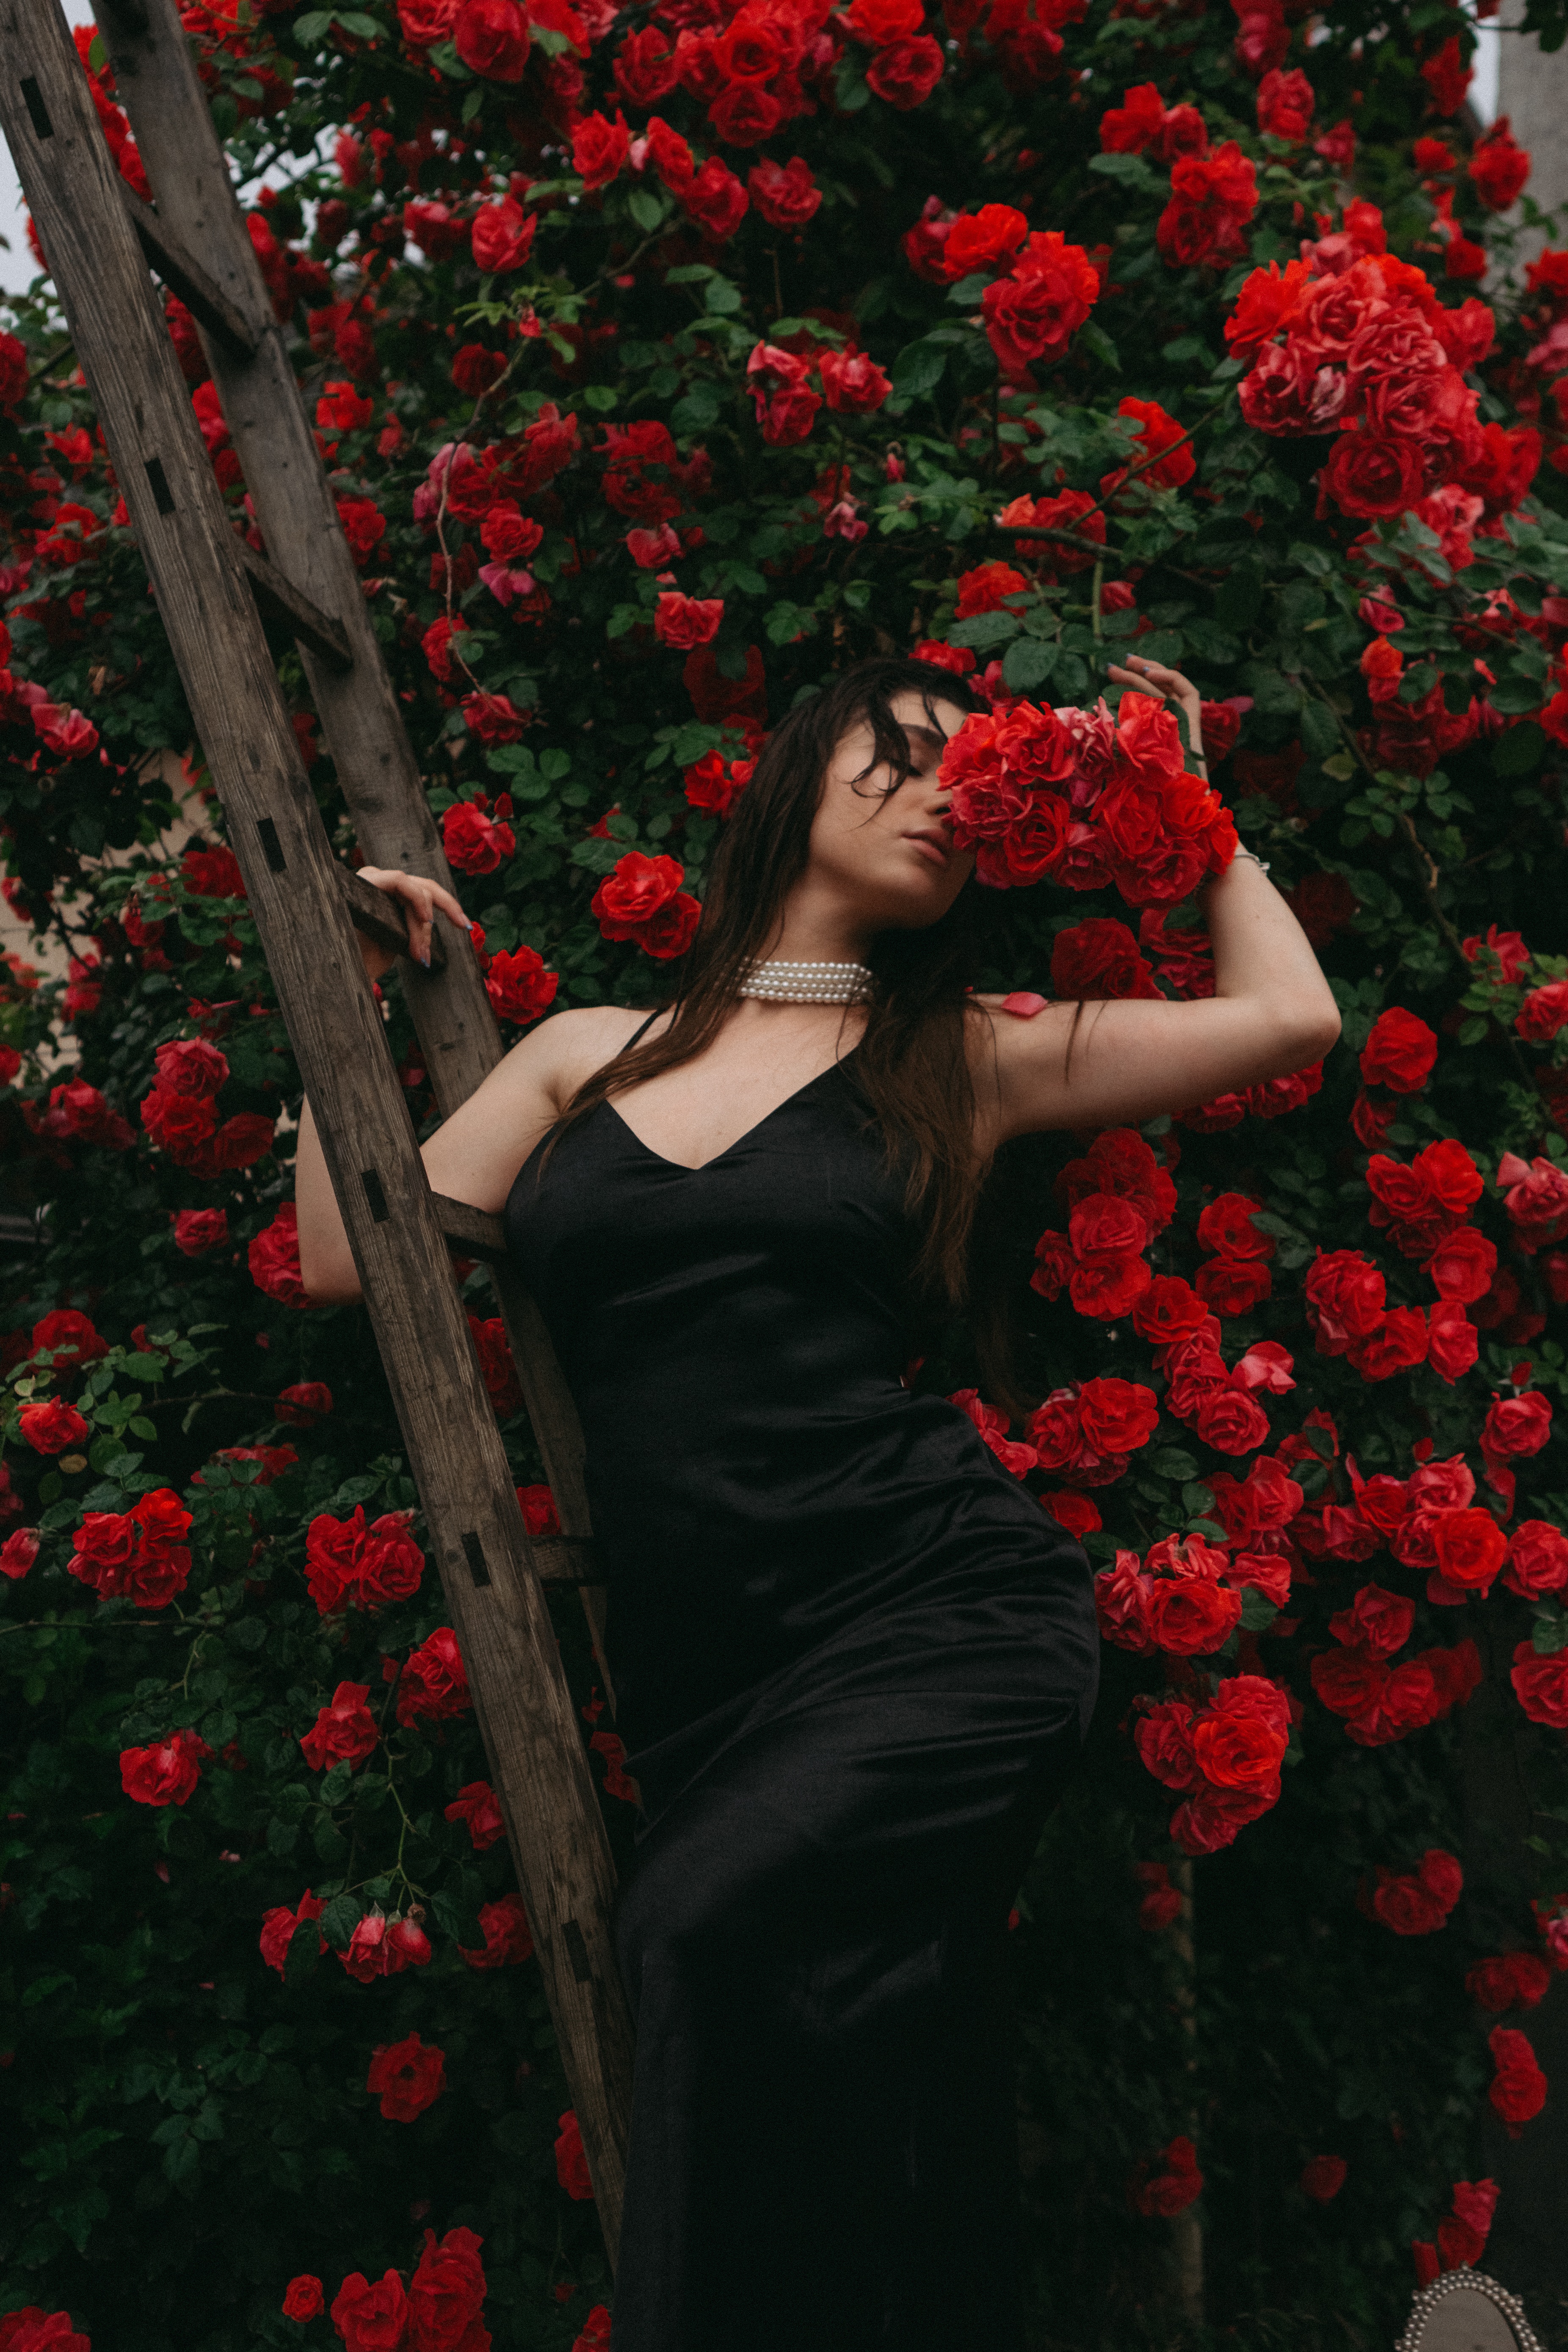 A woman on a ladder and in front of a rose bush. | Source: Pexels